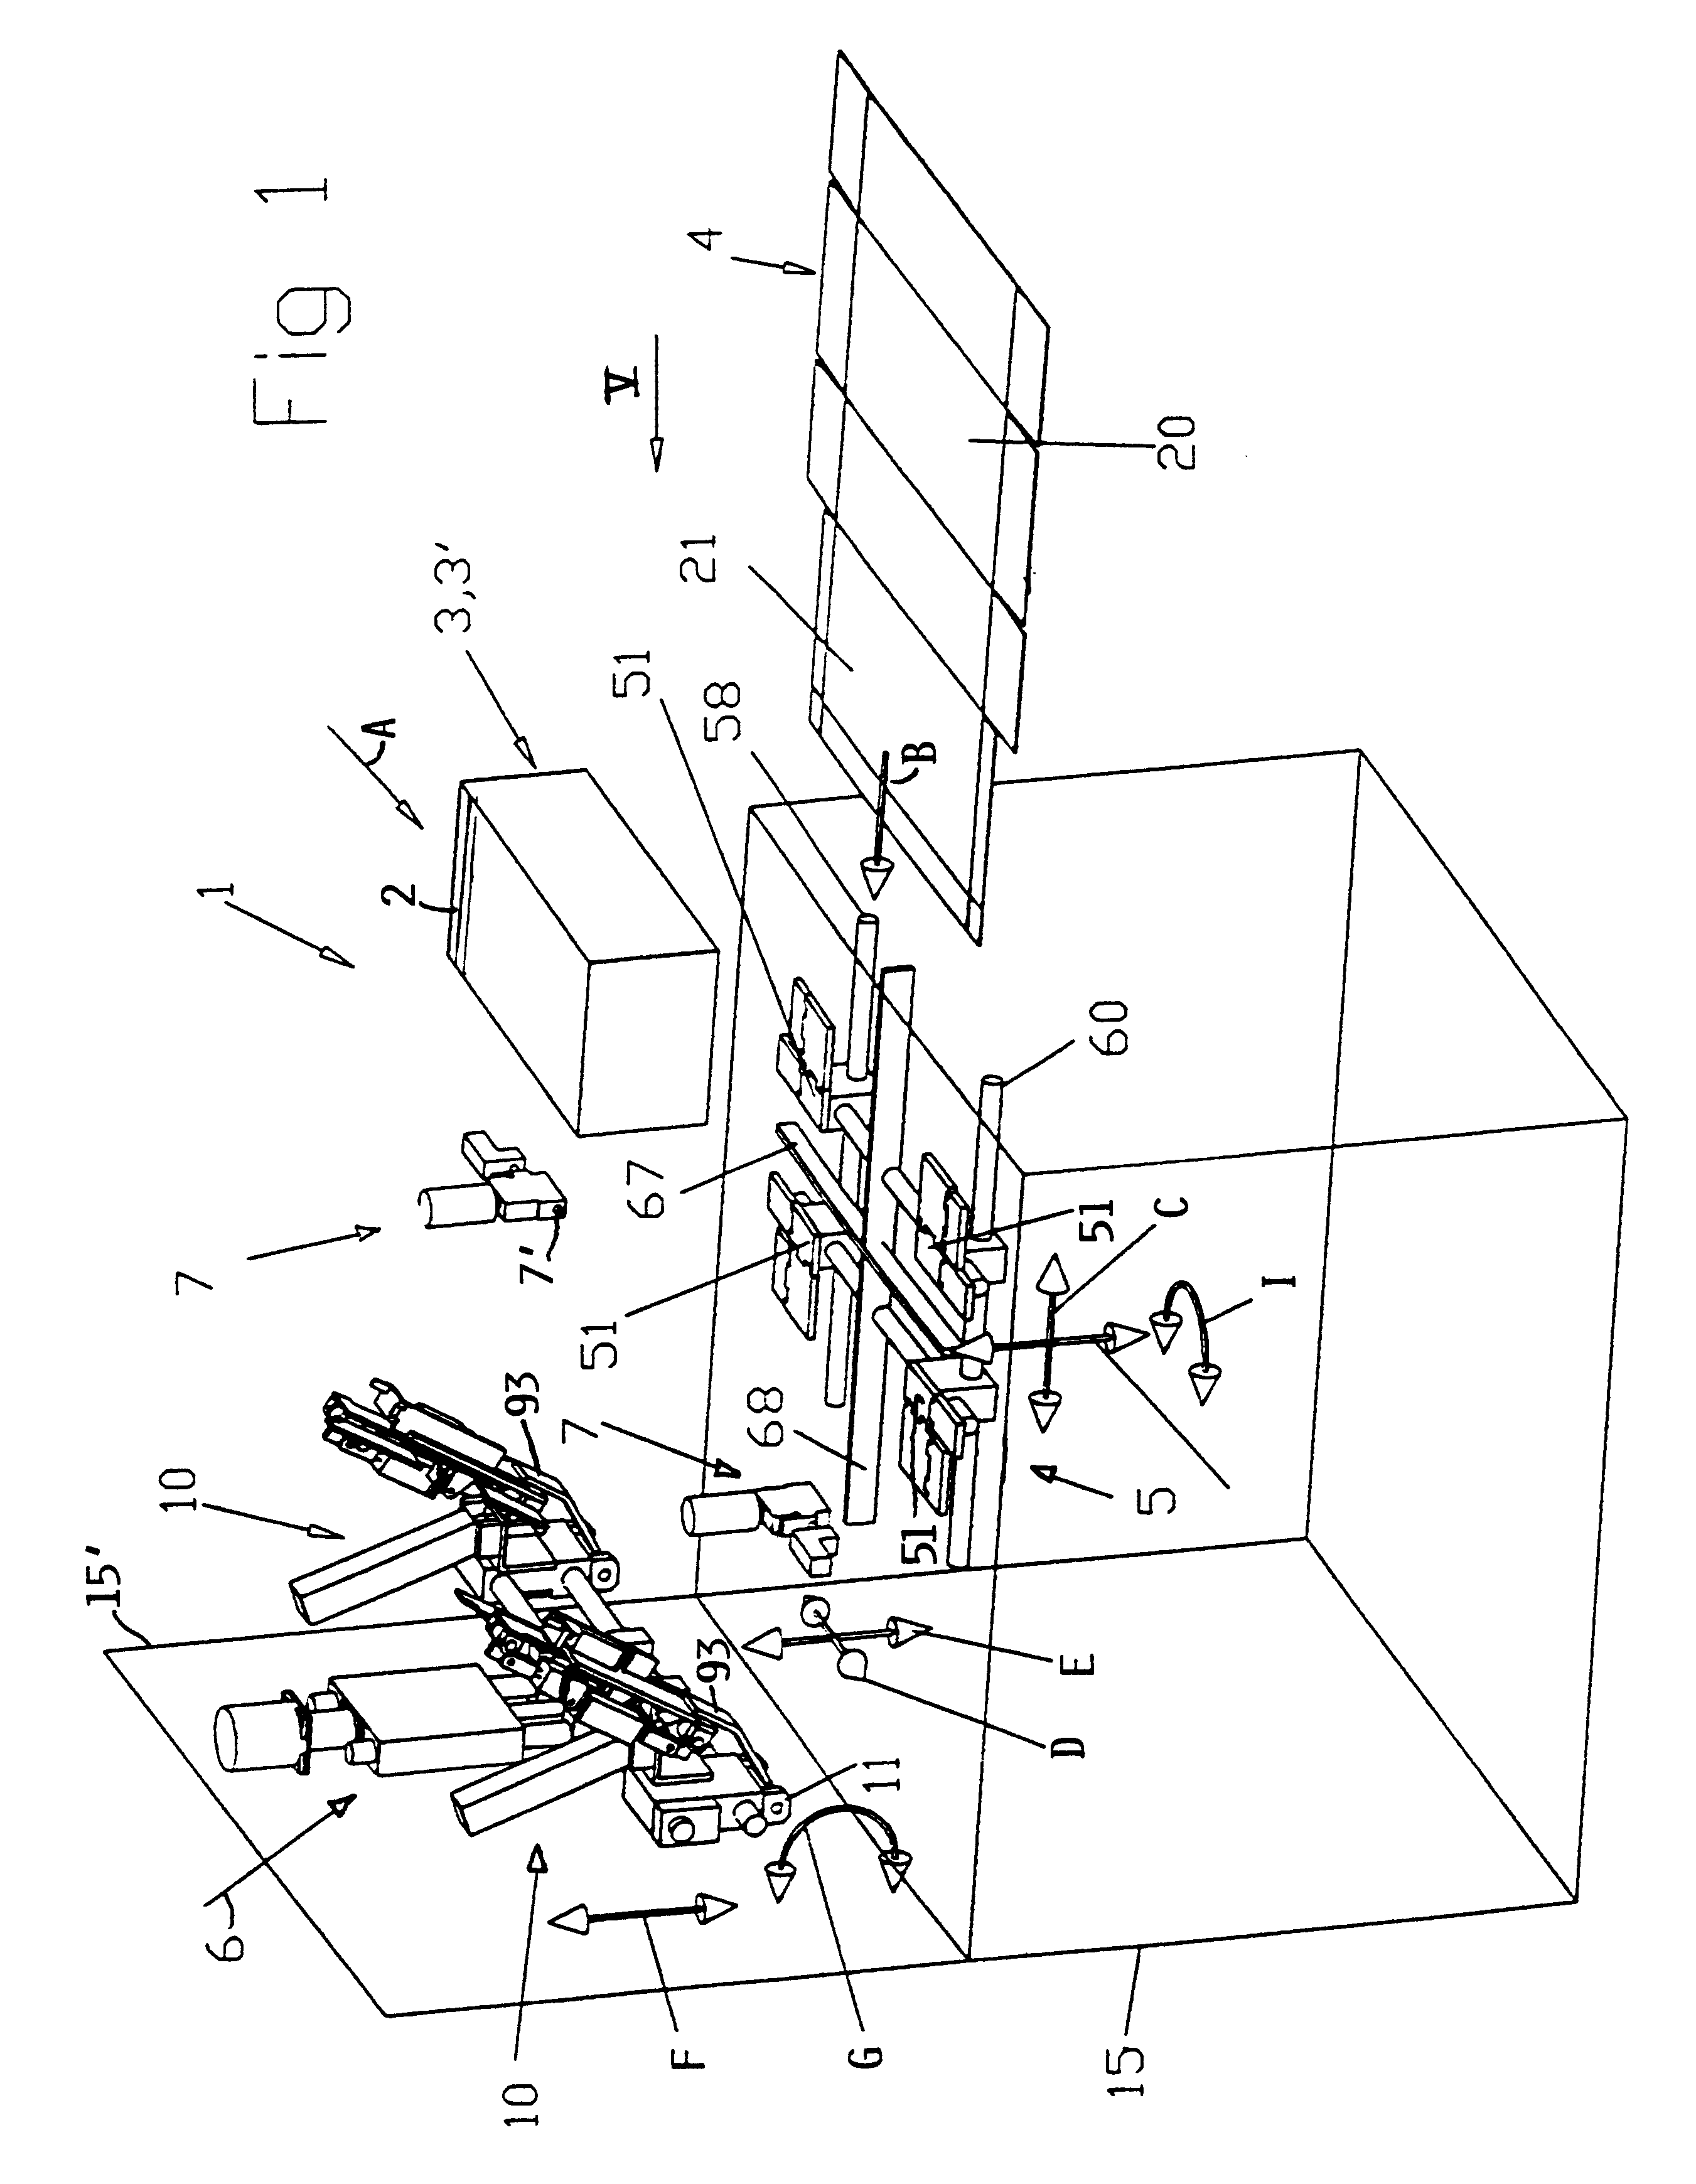 Apparatus for forming cartons from blanks and for simultaneously filling the cartons